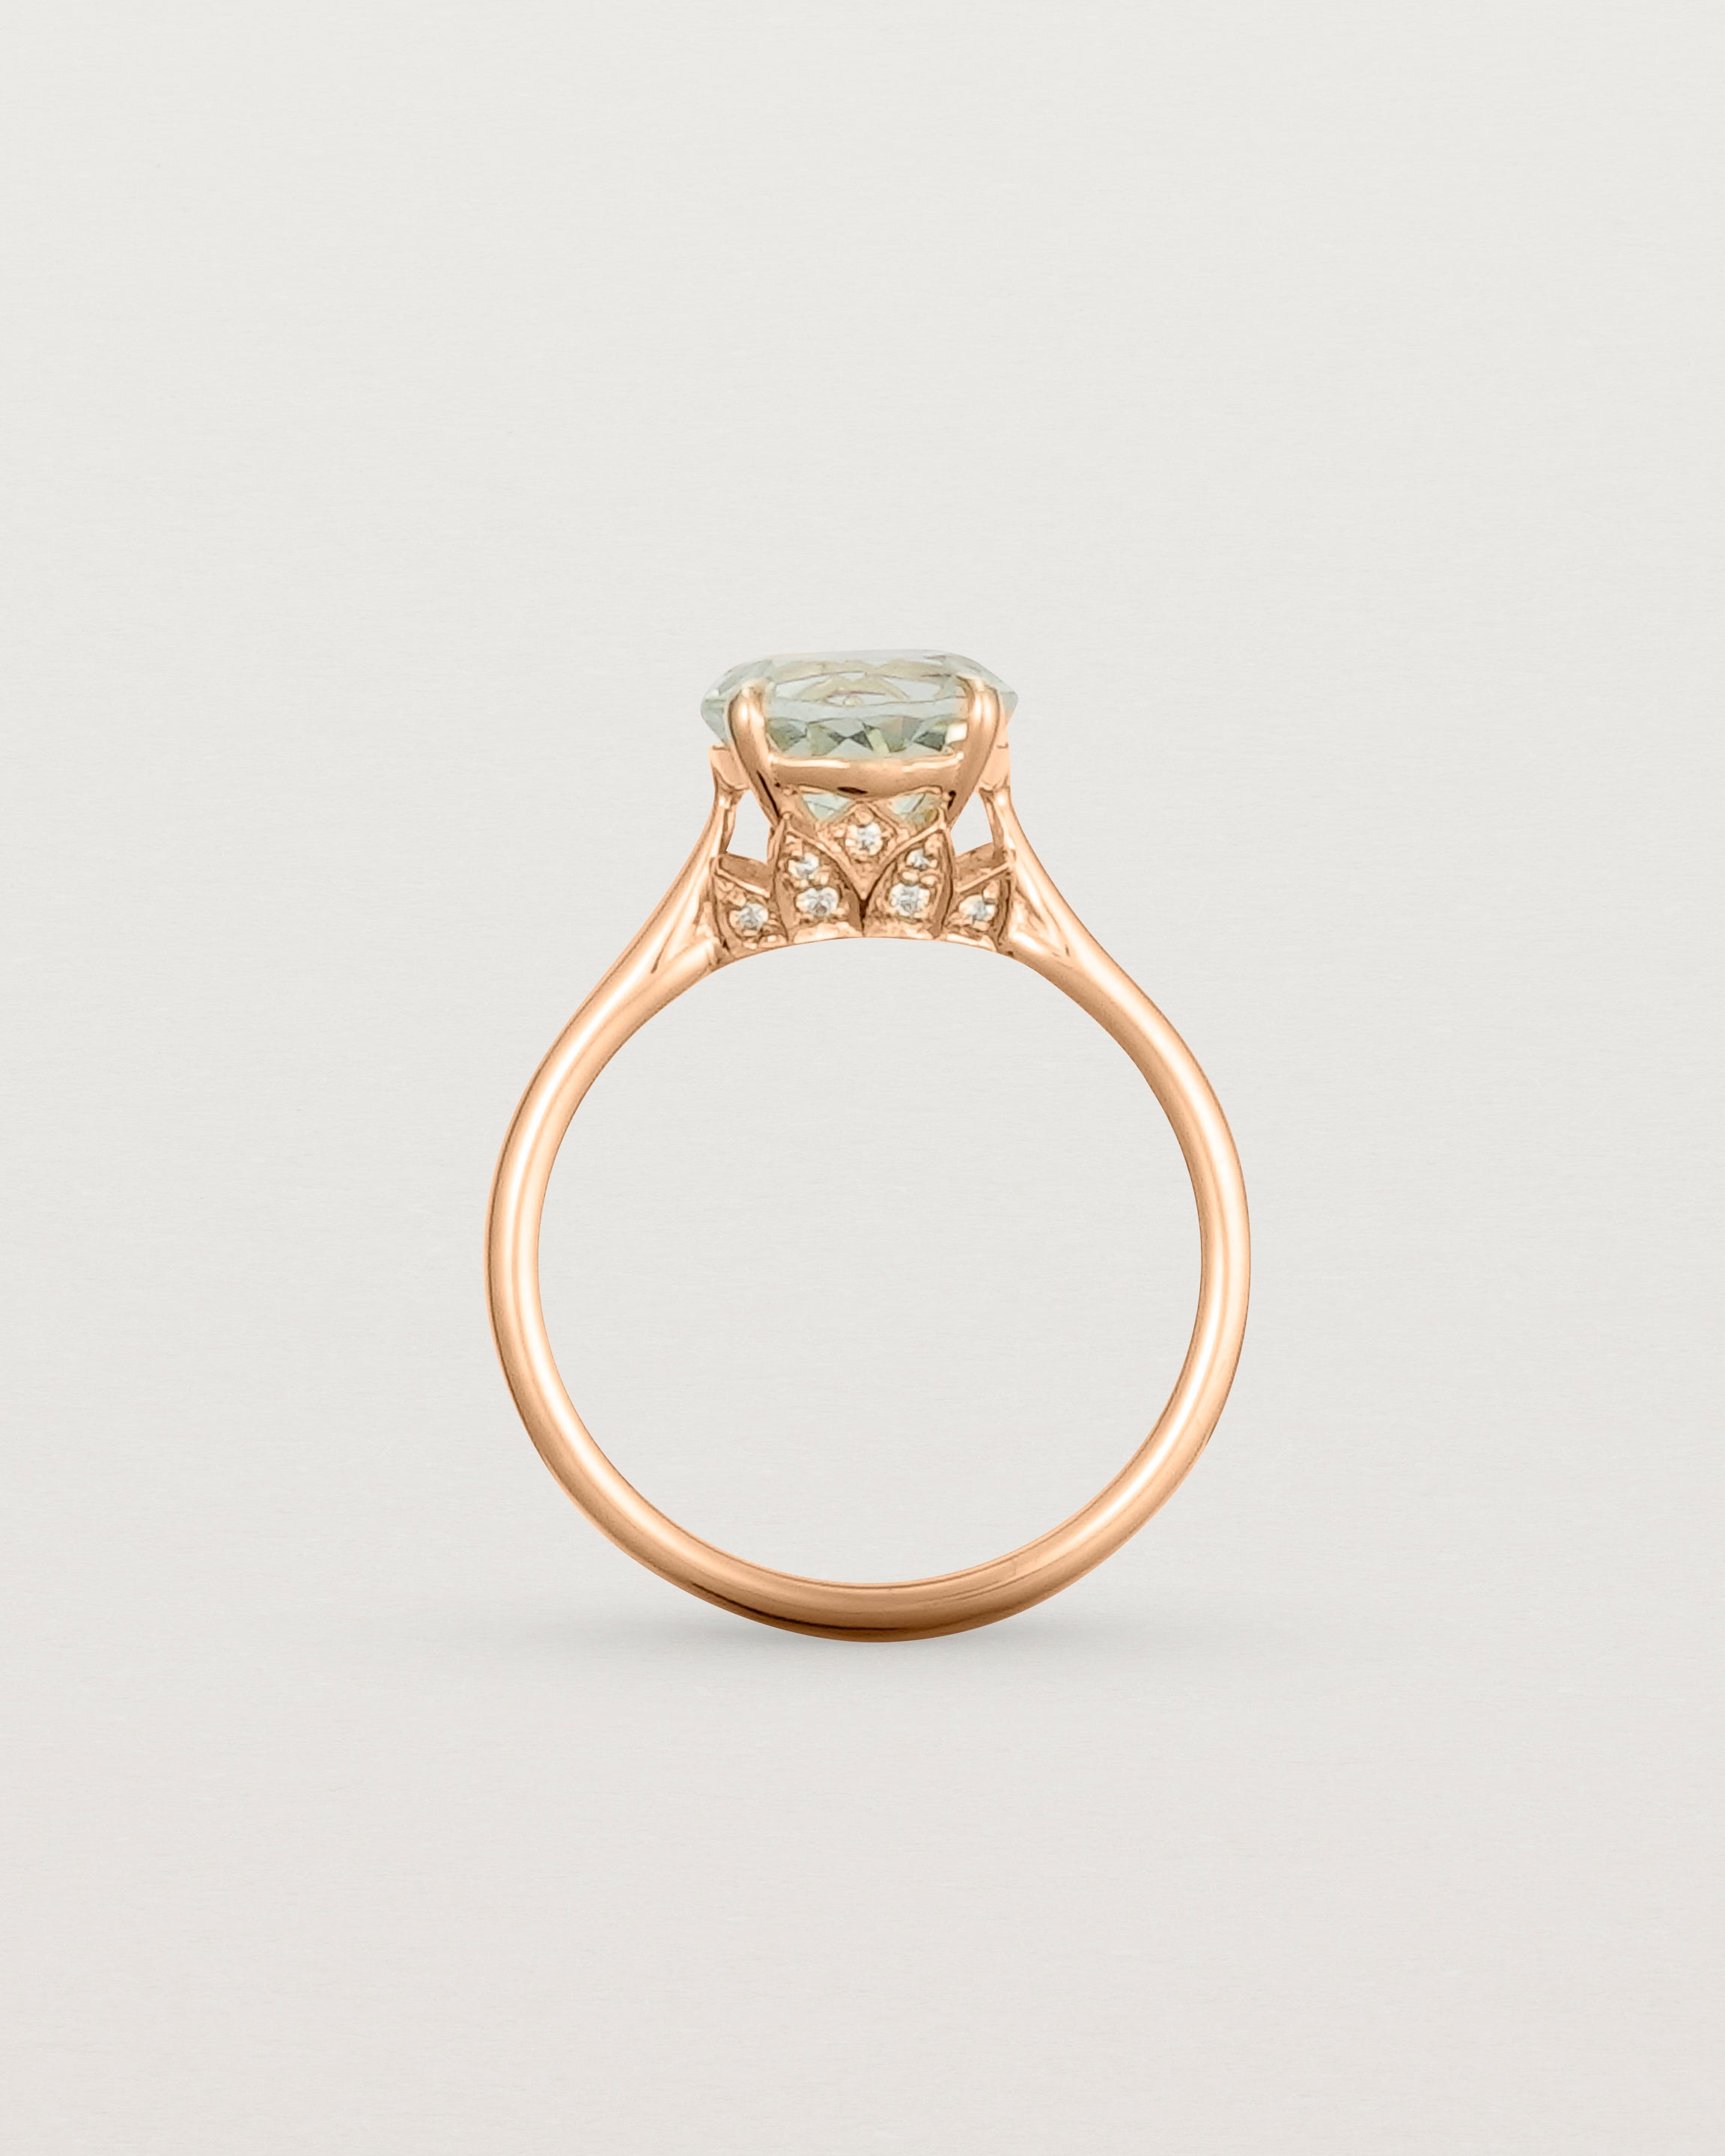 Standing view of the Kalina Round Solitaire | Green Amethyst | Rose Gold.